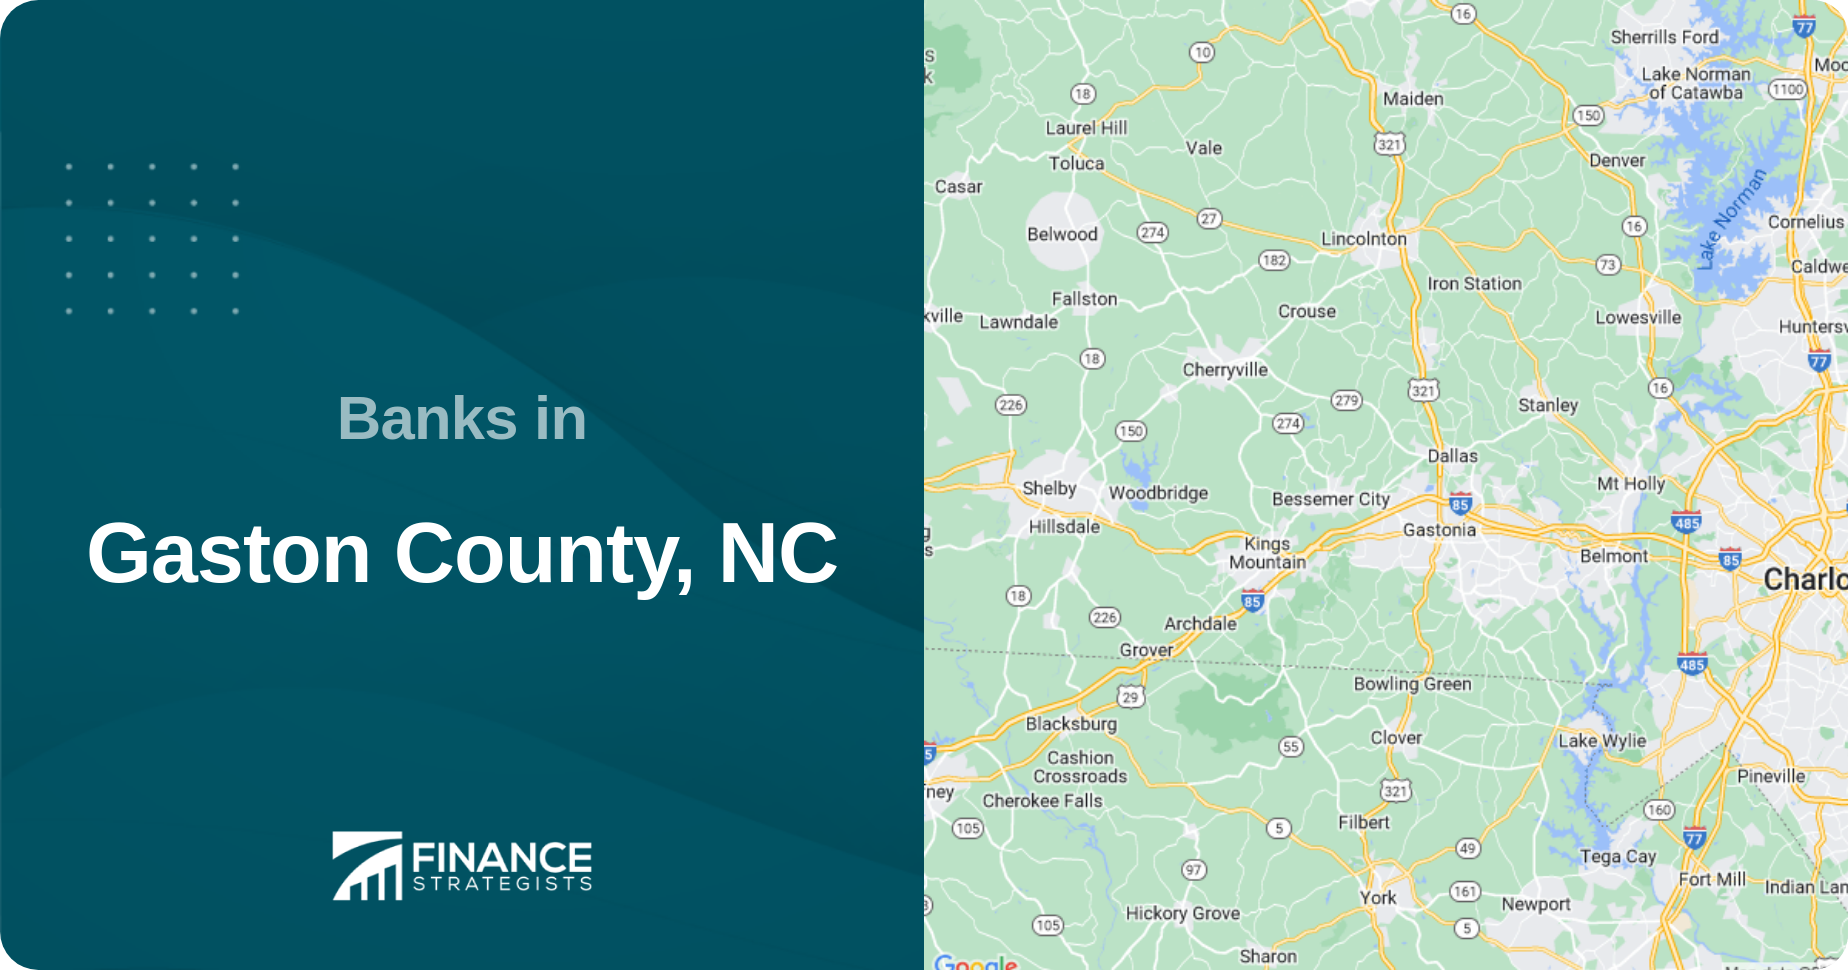 Banks in Gaston County, NC